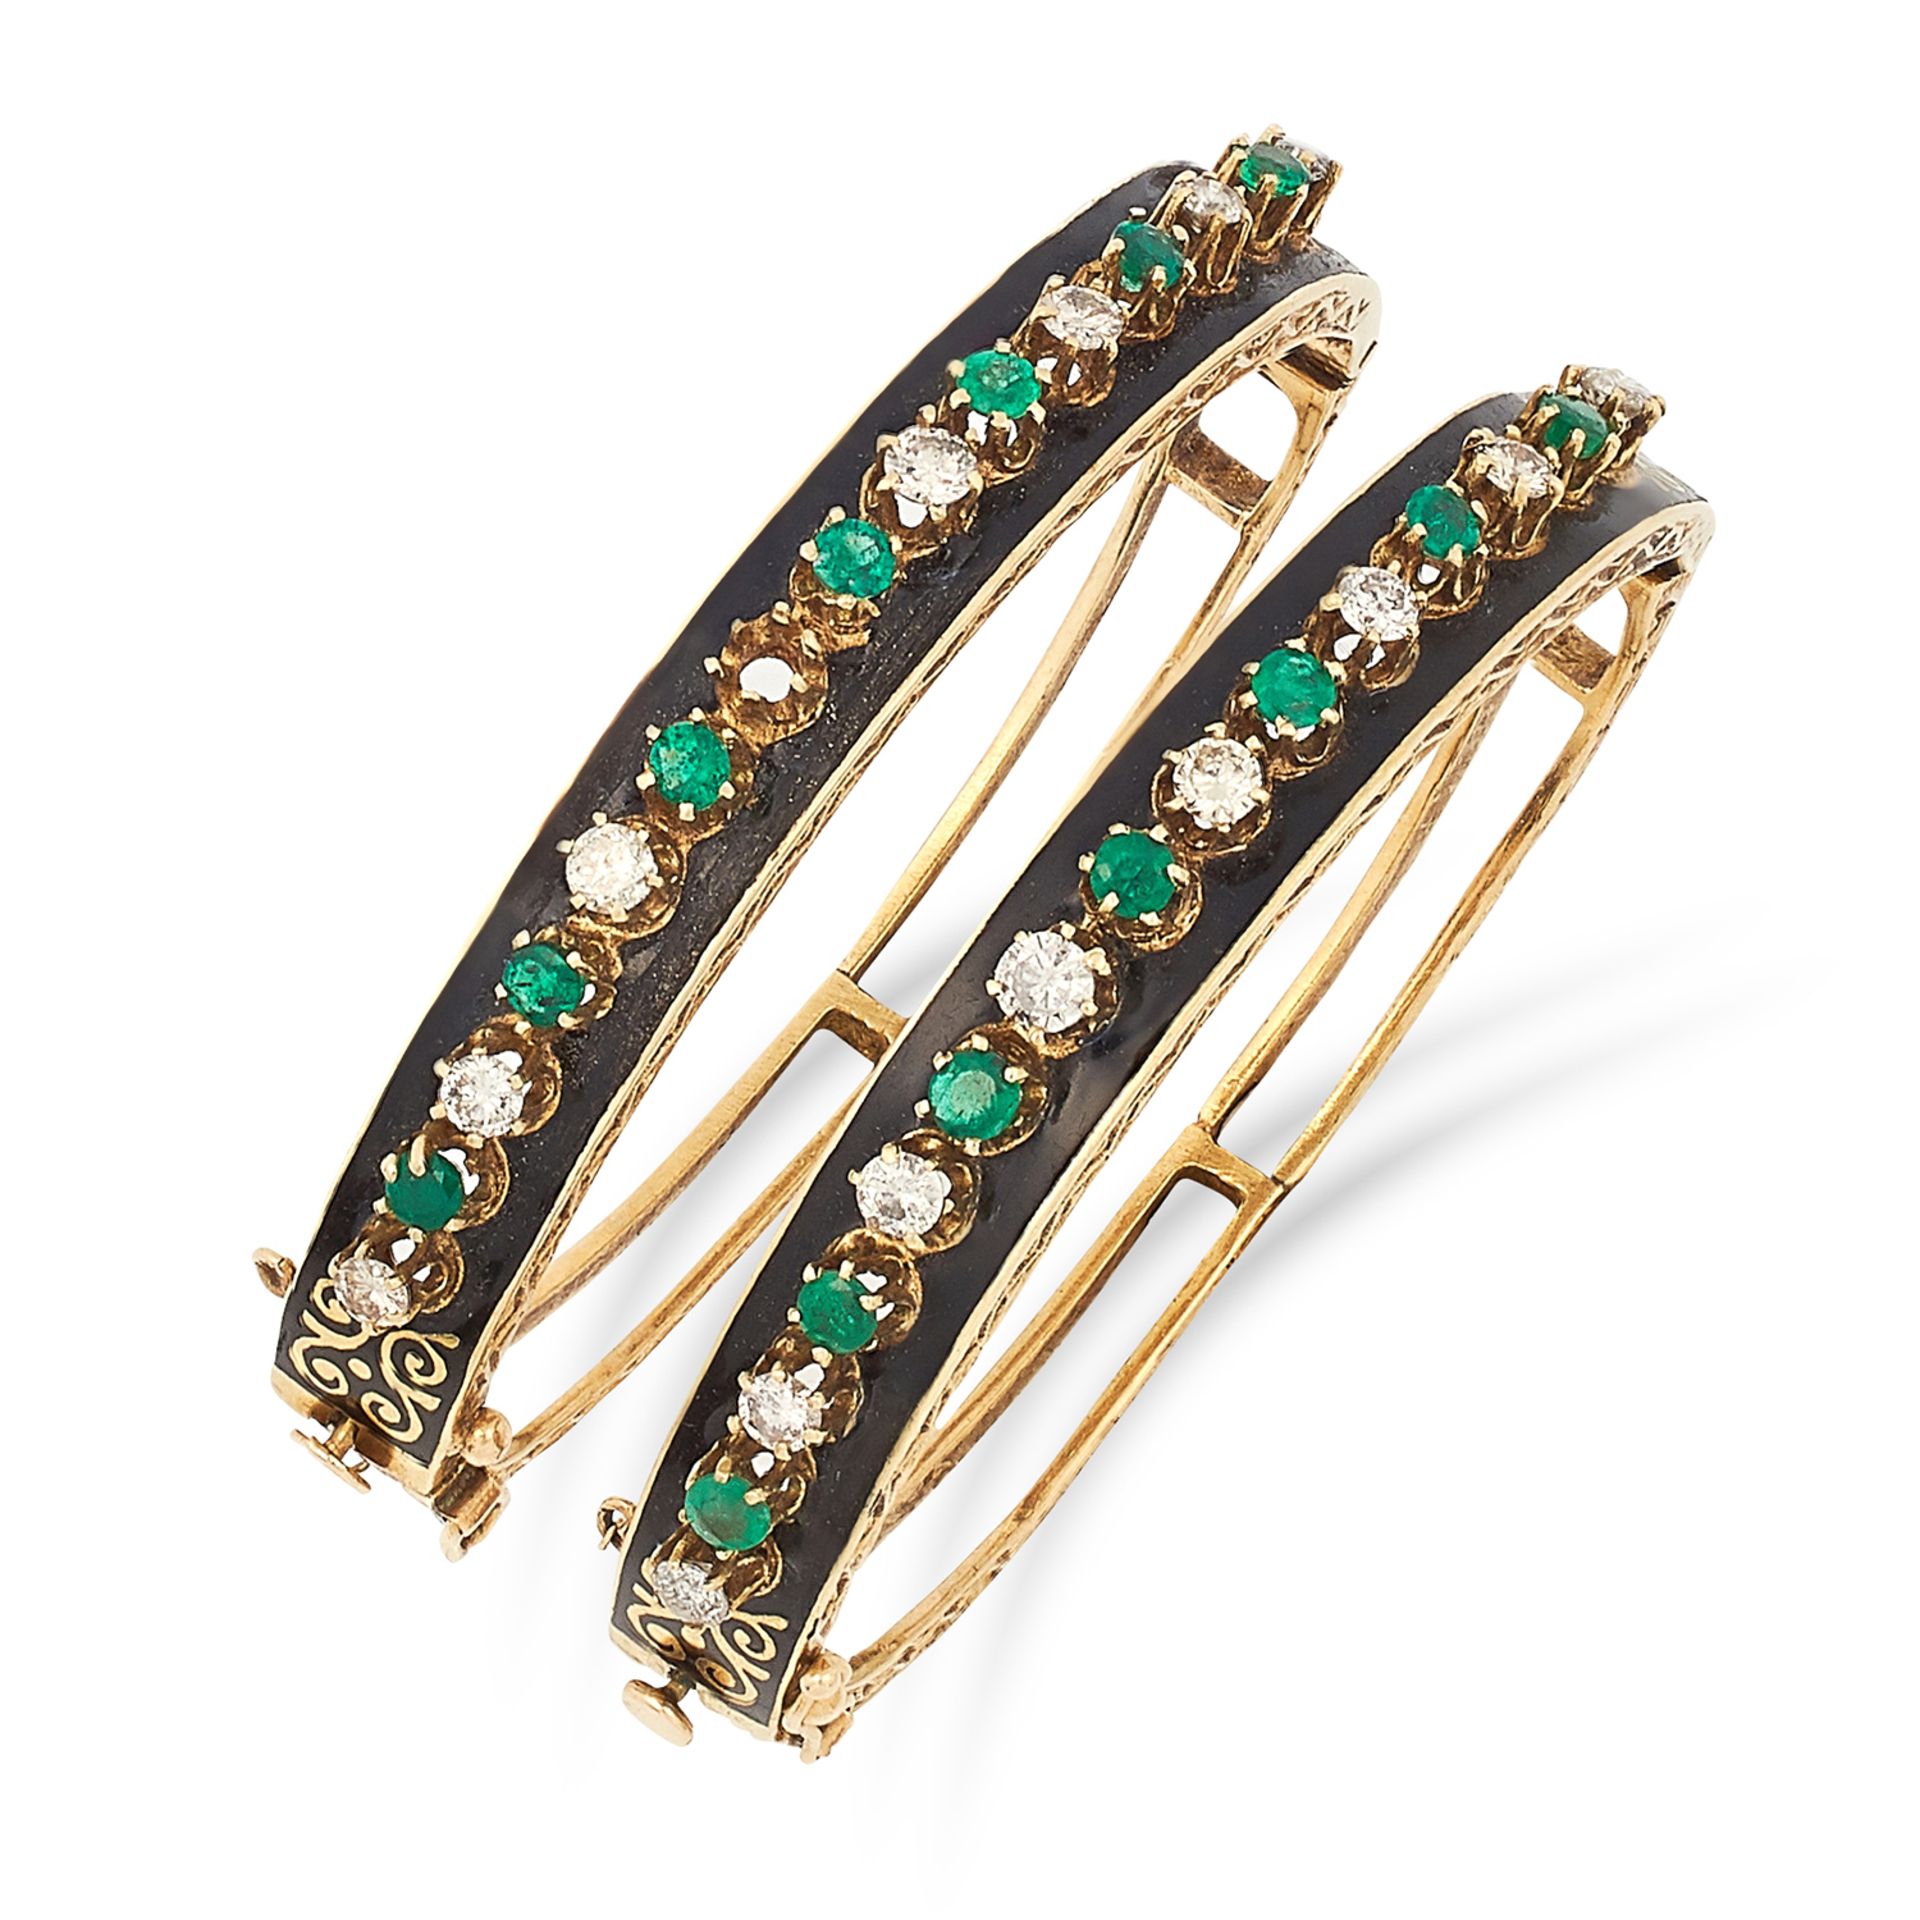 TWO EMERALD, DIAMOND AND ENAMEL BANGLES set with alternating round cut diamonds and emeralds on